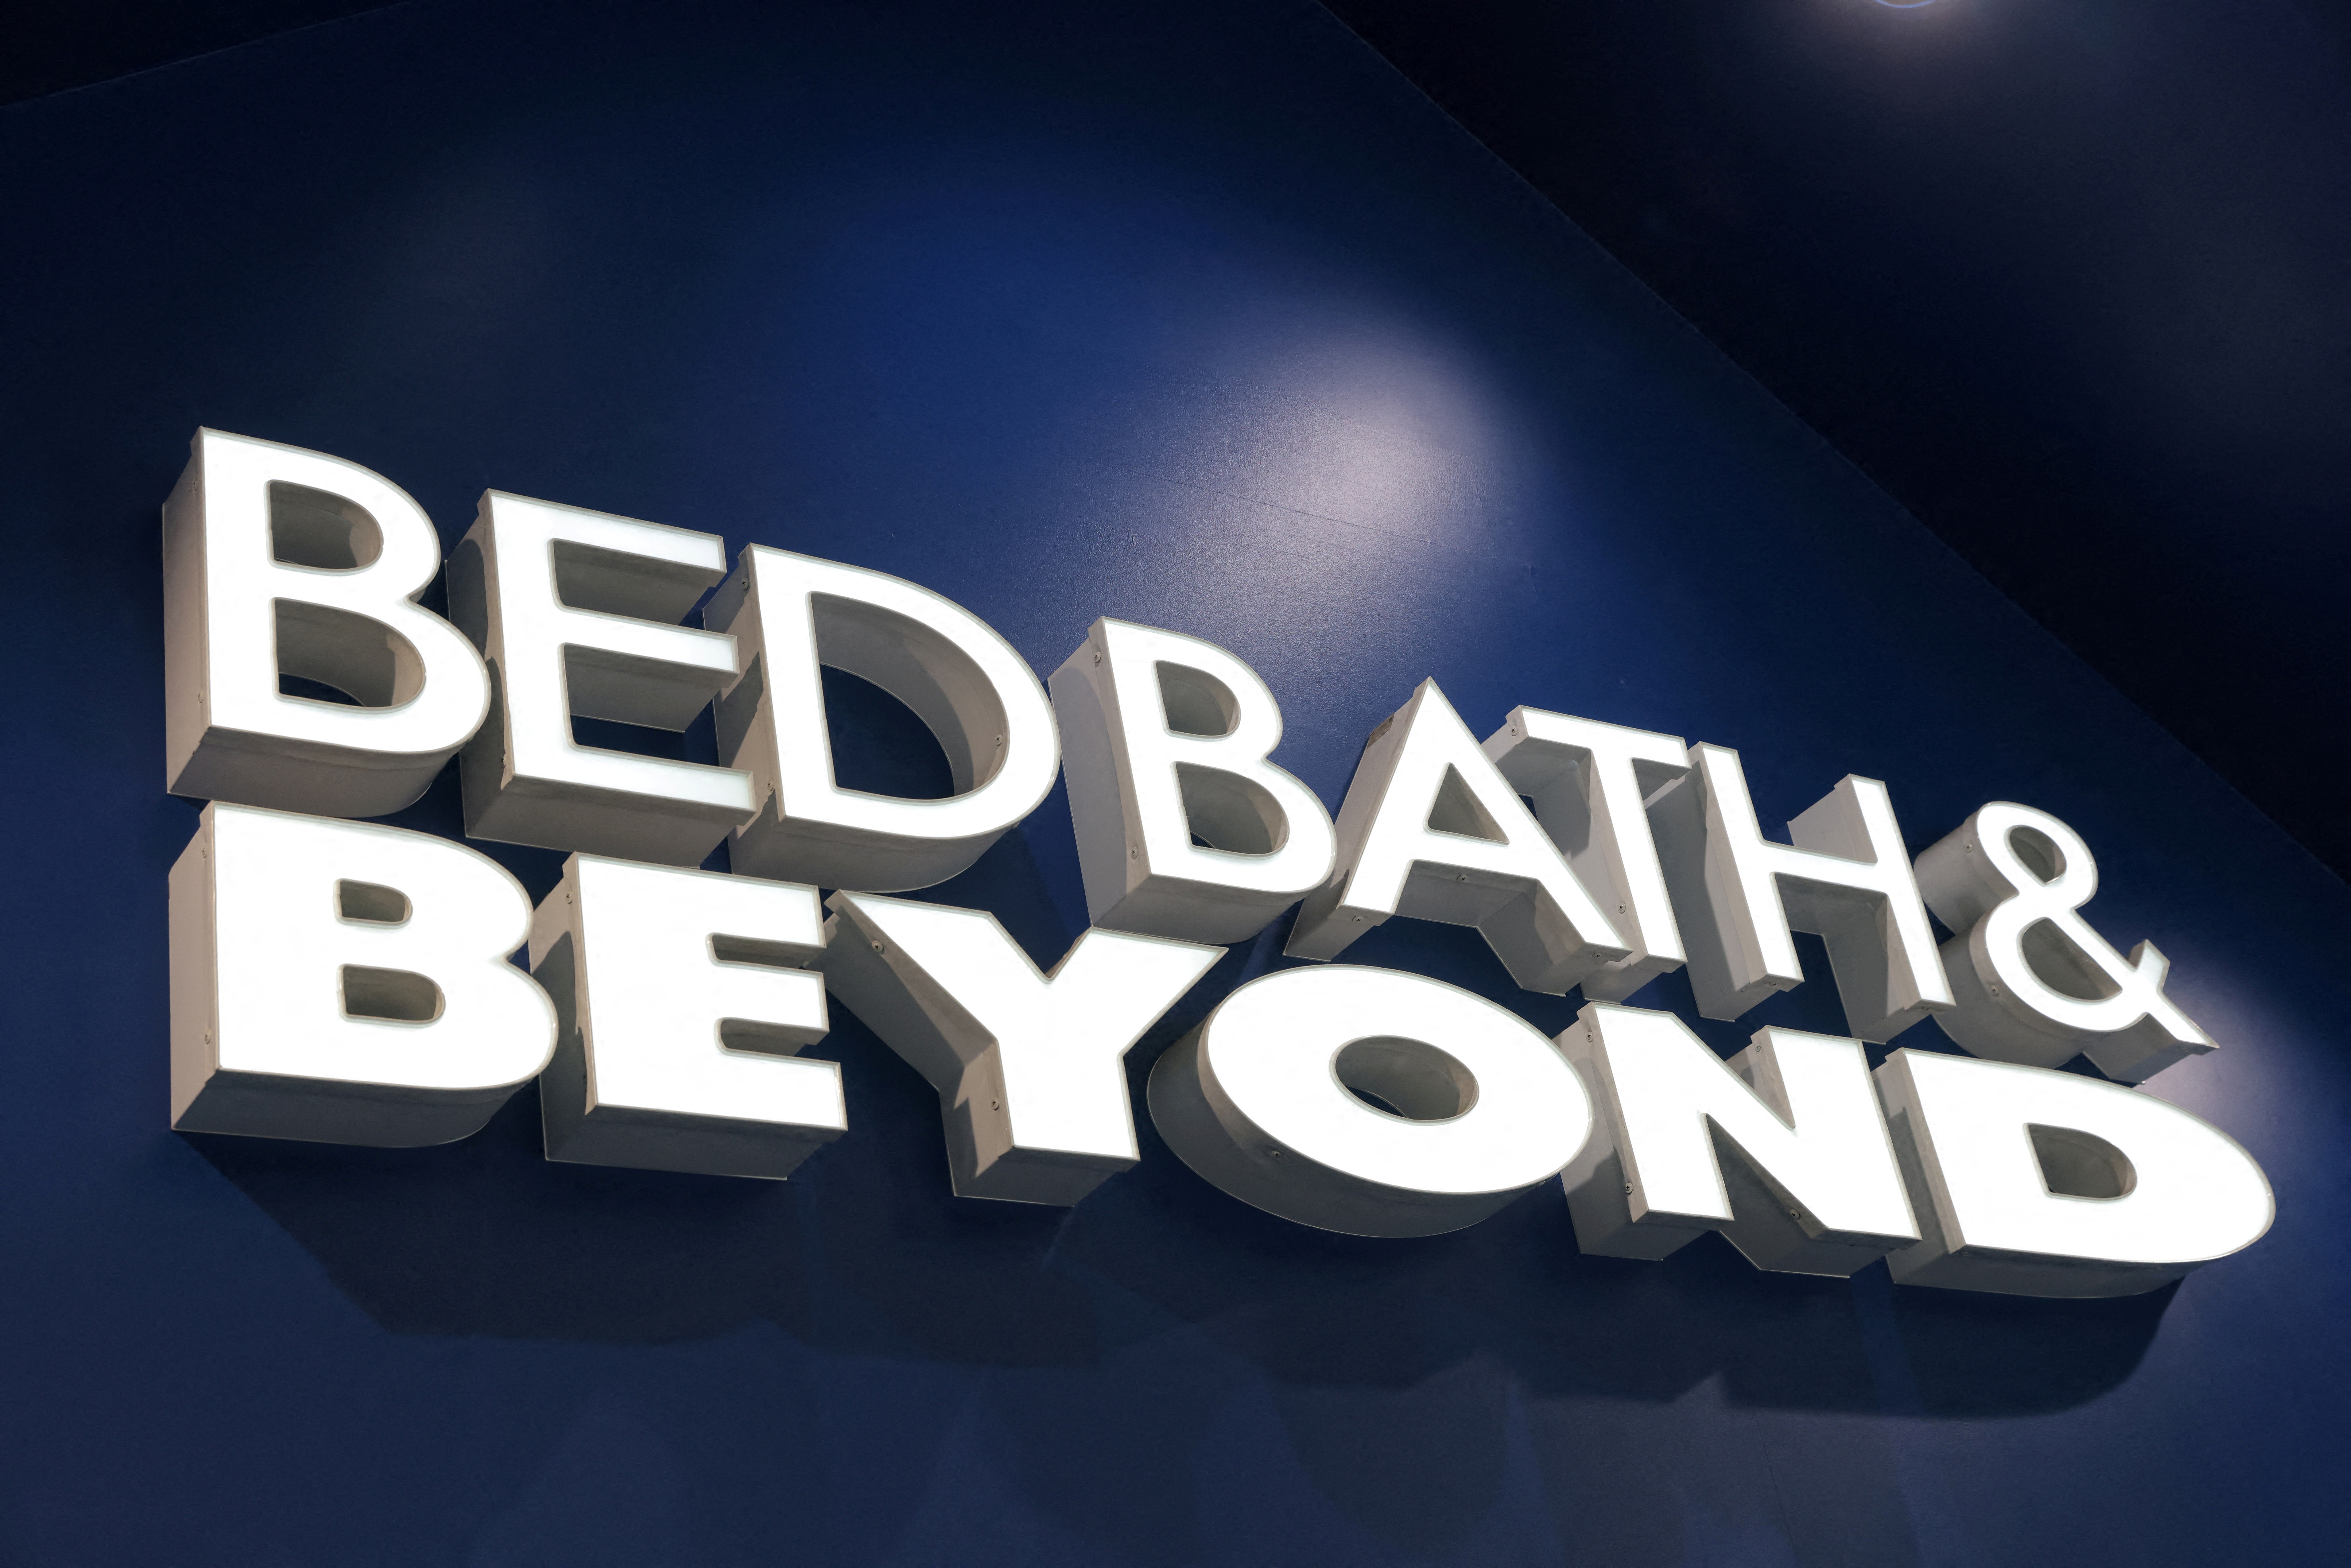 Signs are visible at the Bed Bath & Beyond store in Manhattan, New York